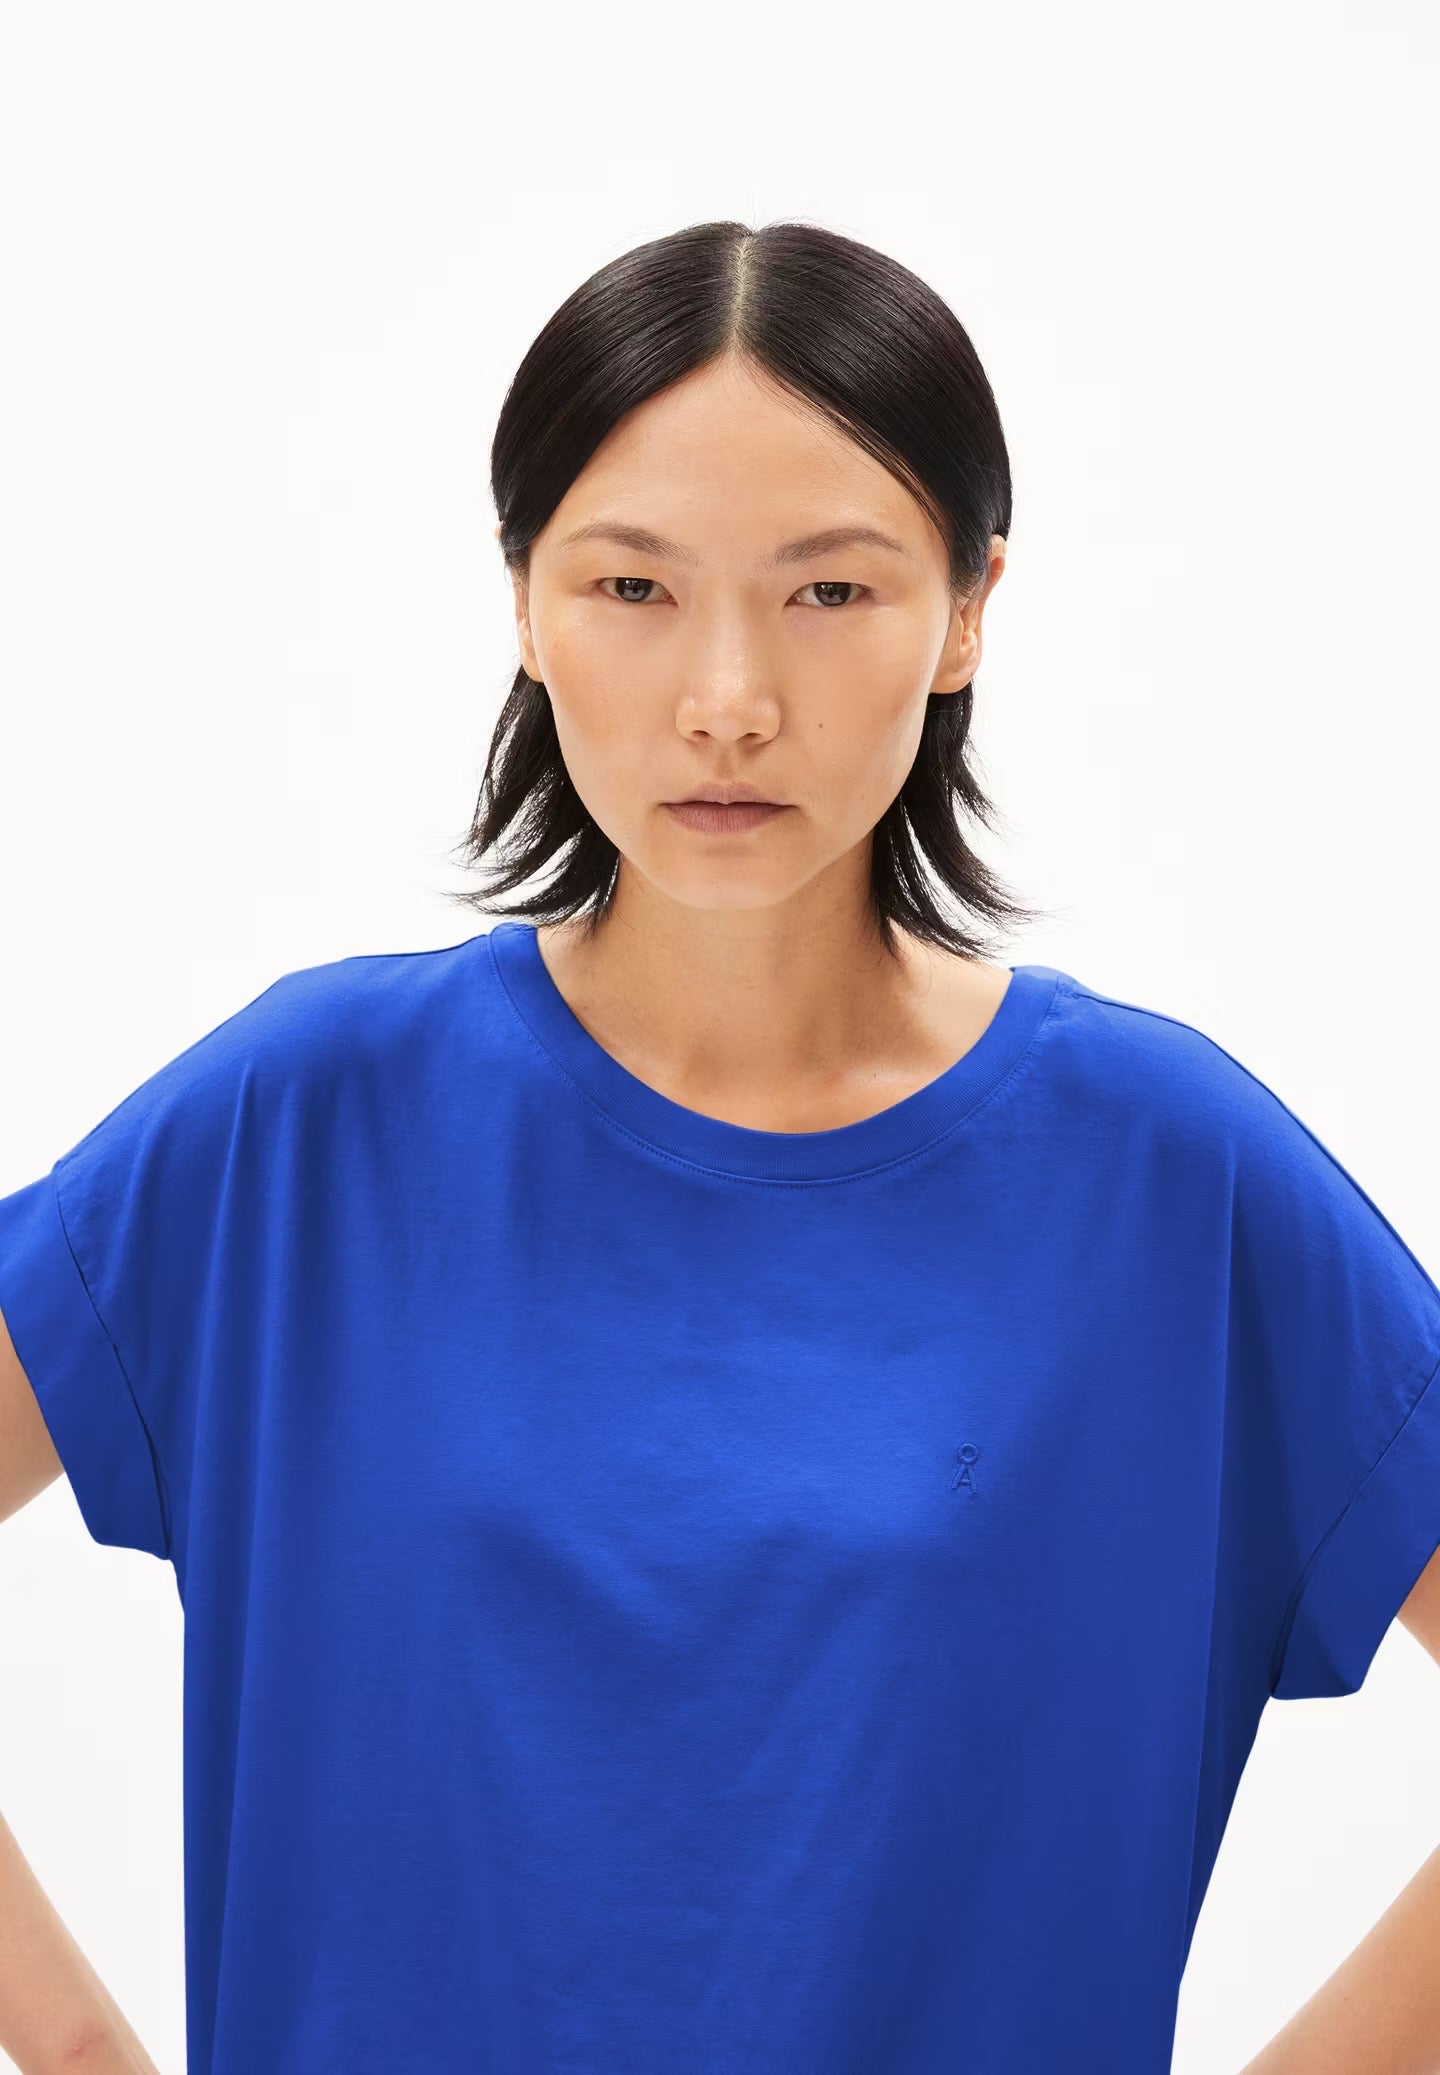 Relaxed fit cap sleeve t-shirt by ARMEDANGELS in bright blue, made from a sustainable TENCEL™ and organic cotton mix.